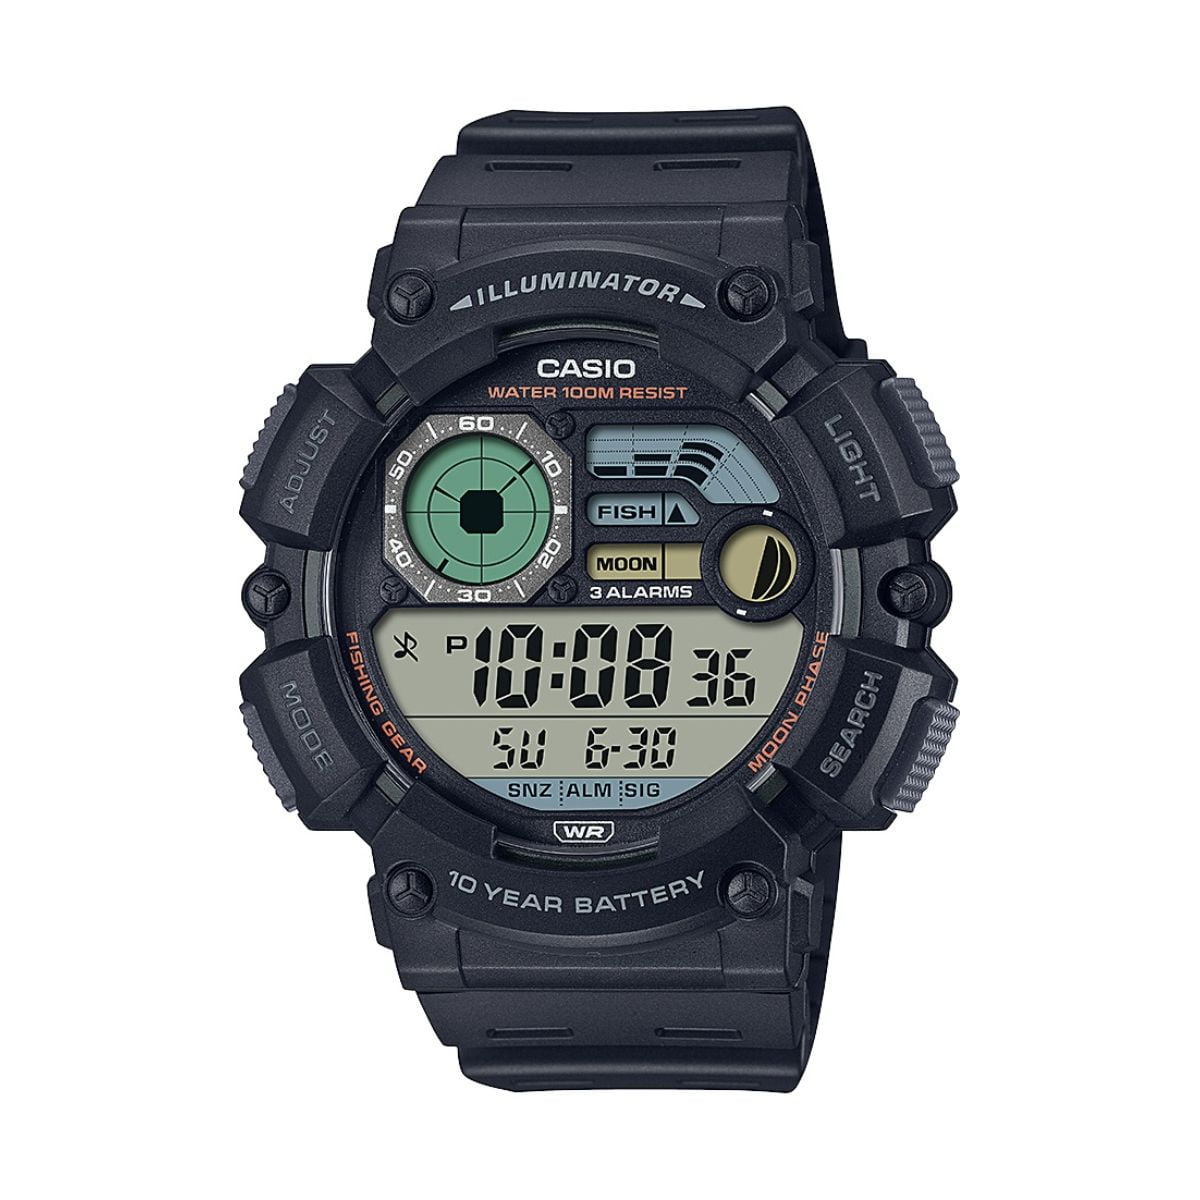 Buy CASIO Watch Cheap Casio Chipkashi Digital Outdoor Fishing Timer Men's  WS-1200H-1AV [Parallel Import] from Japan - Buy authentic Plus exclusive  items from Japan